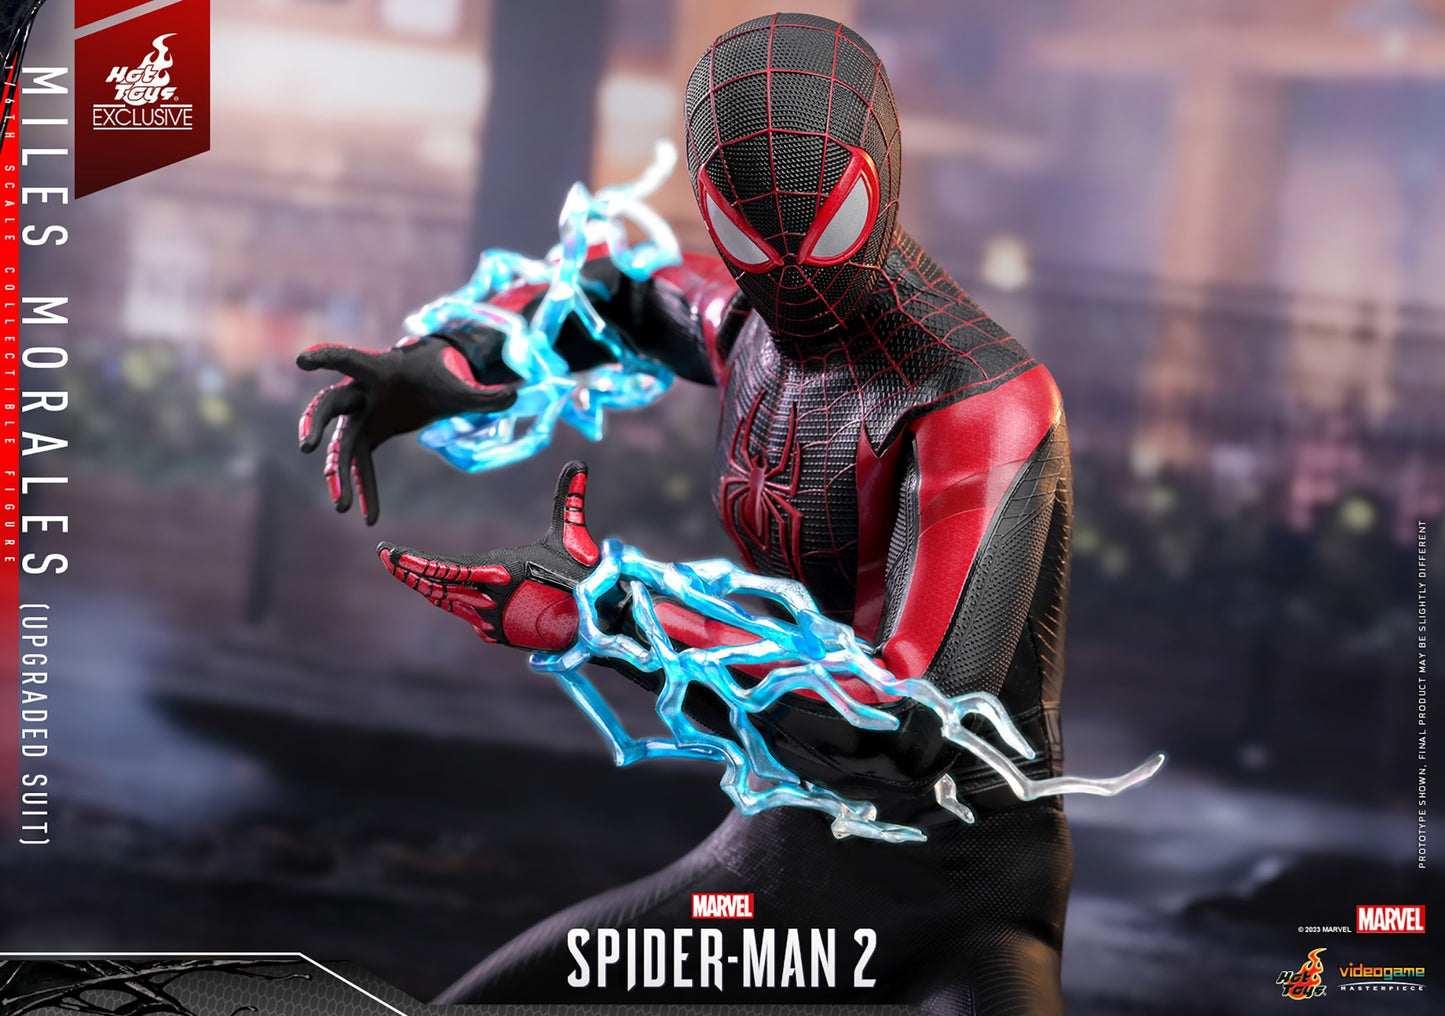 Miles Morales (Upgraded Suit) - Marvel's Spider-Man 2